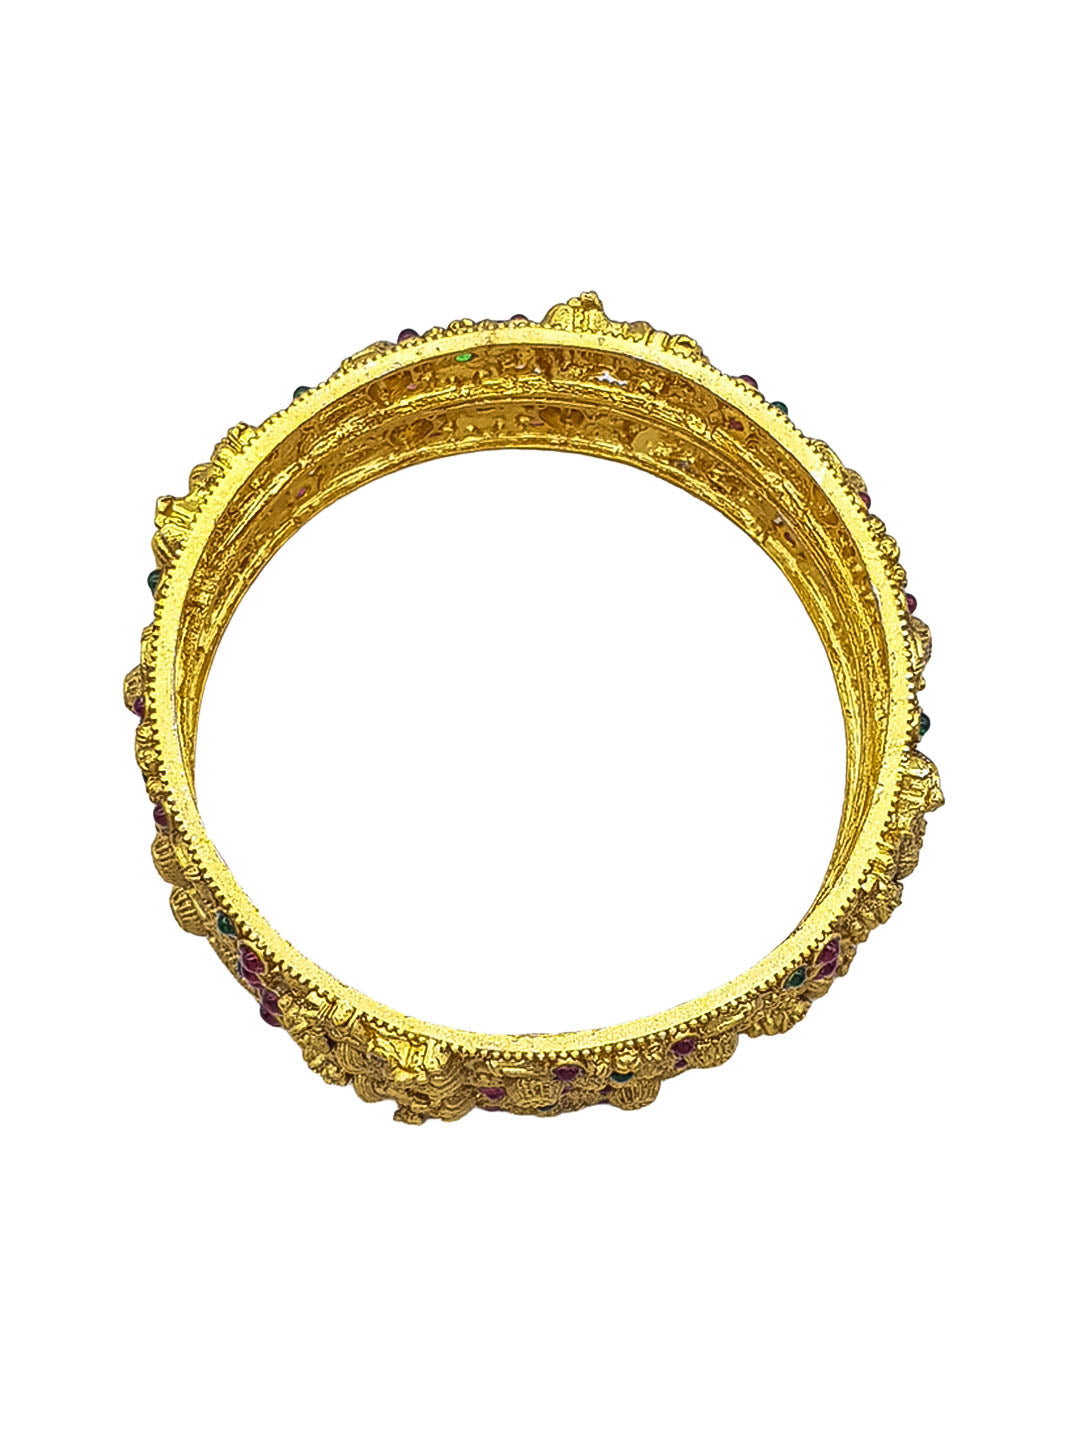 Premium Gold Plated Set of 2 Bangles with AD Stones 22243A